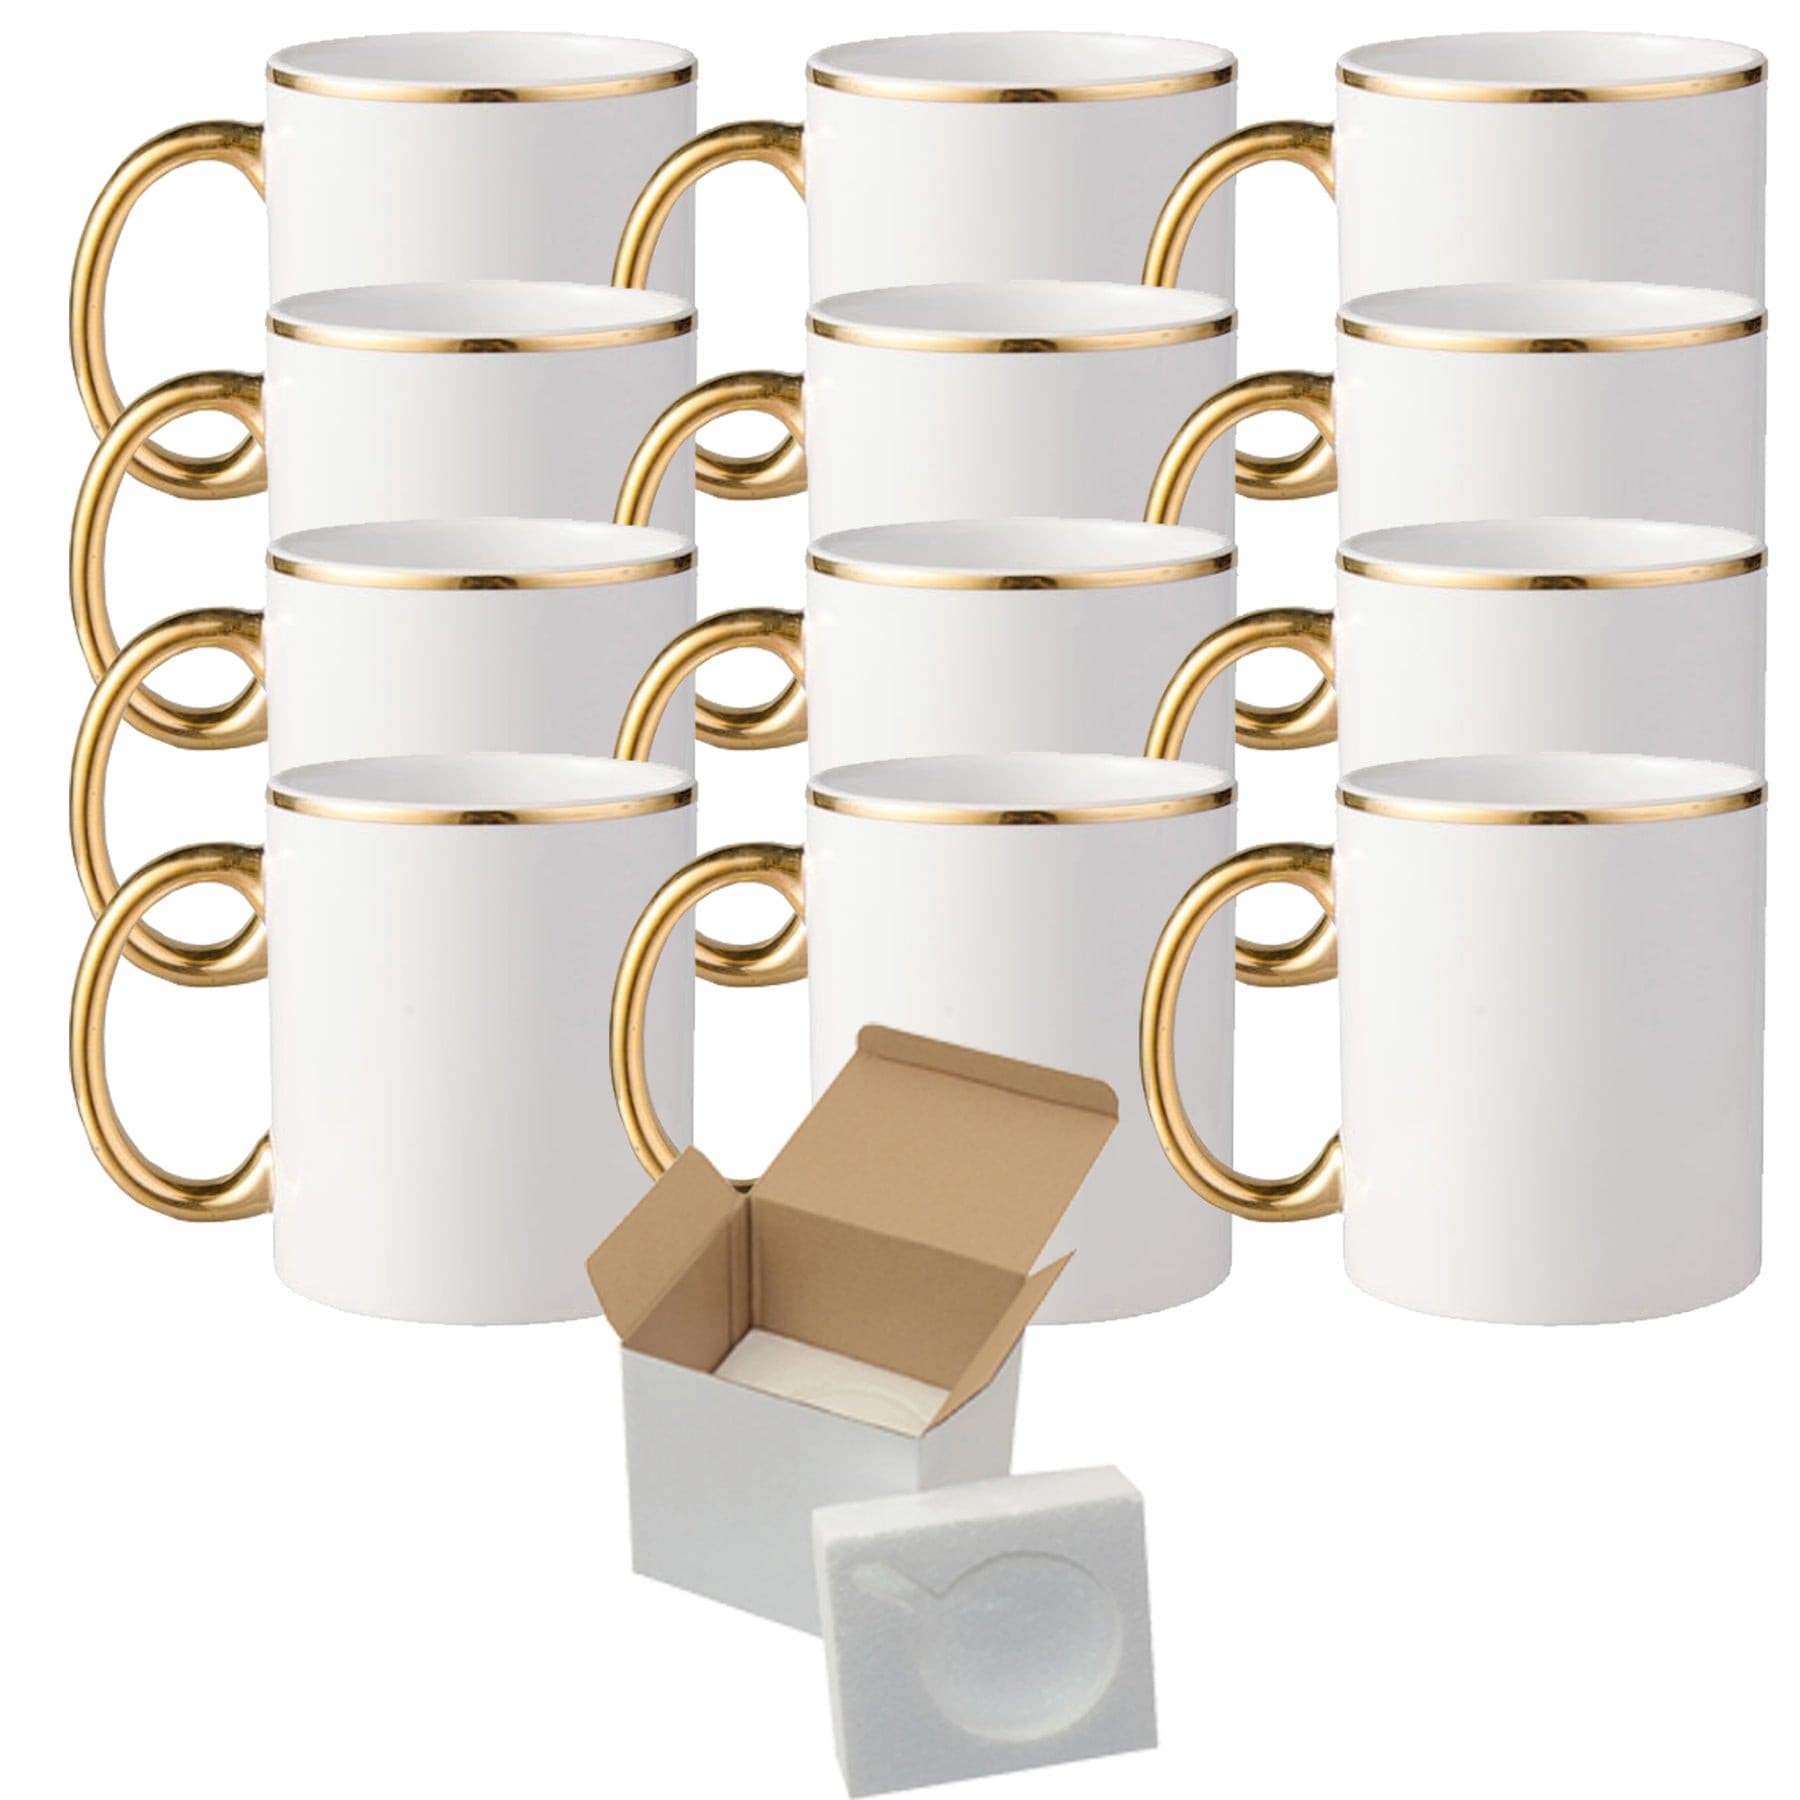 12pcs Sublimation 15oz Coffee Mugs Blank, White/two Tone 6 Color to Choose  